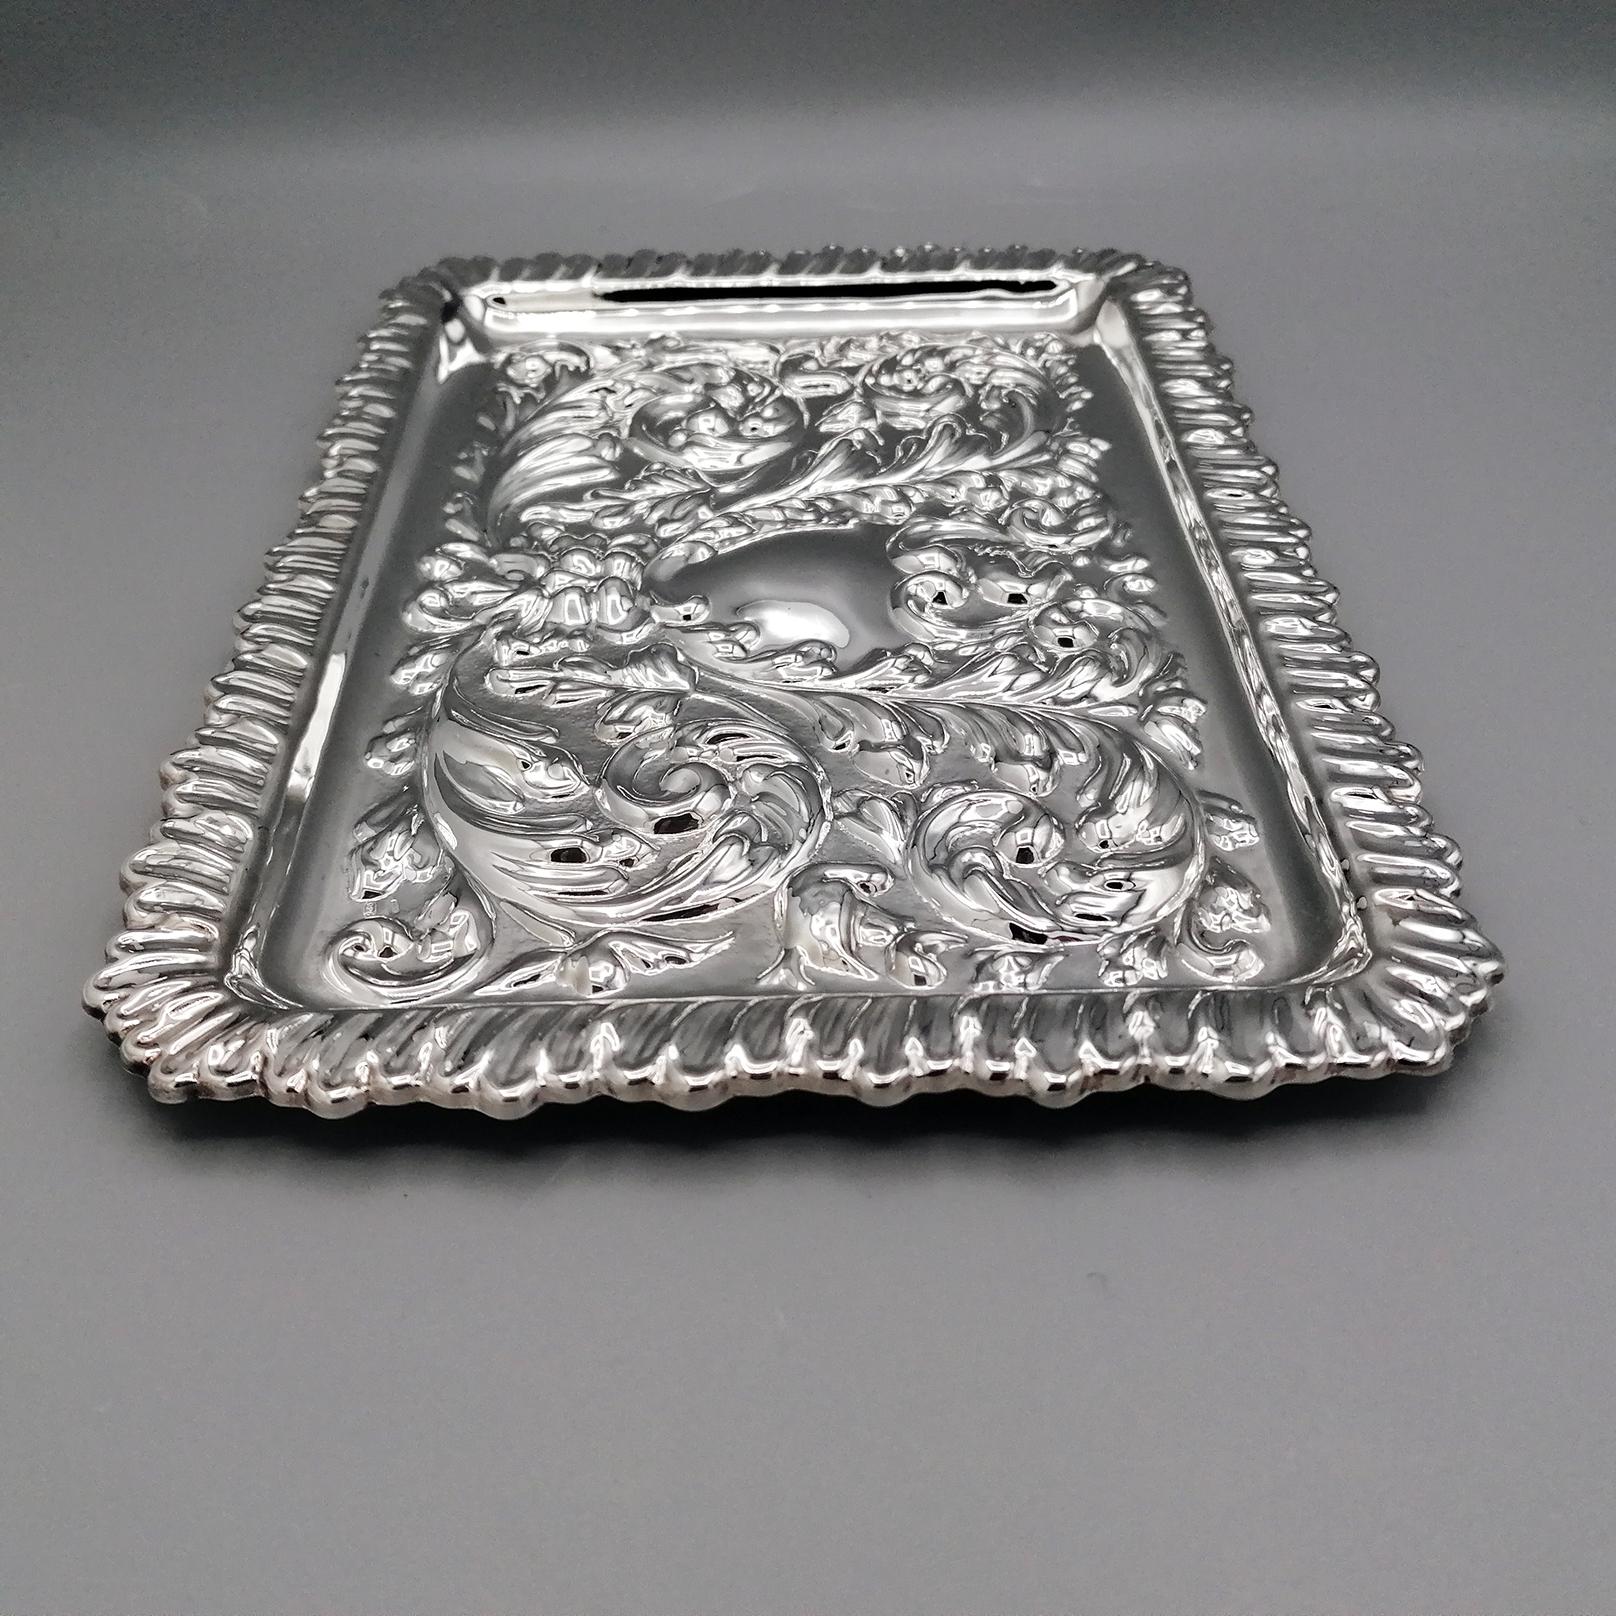 21st Century Italy Sterling Silver Letter tray For Sale 3